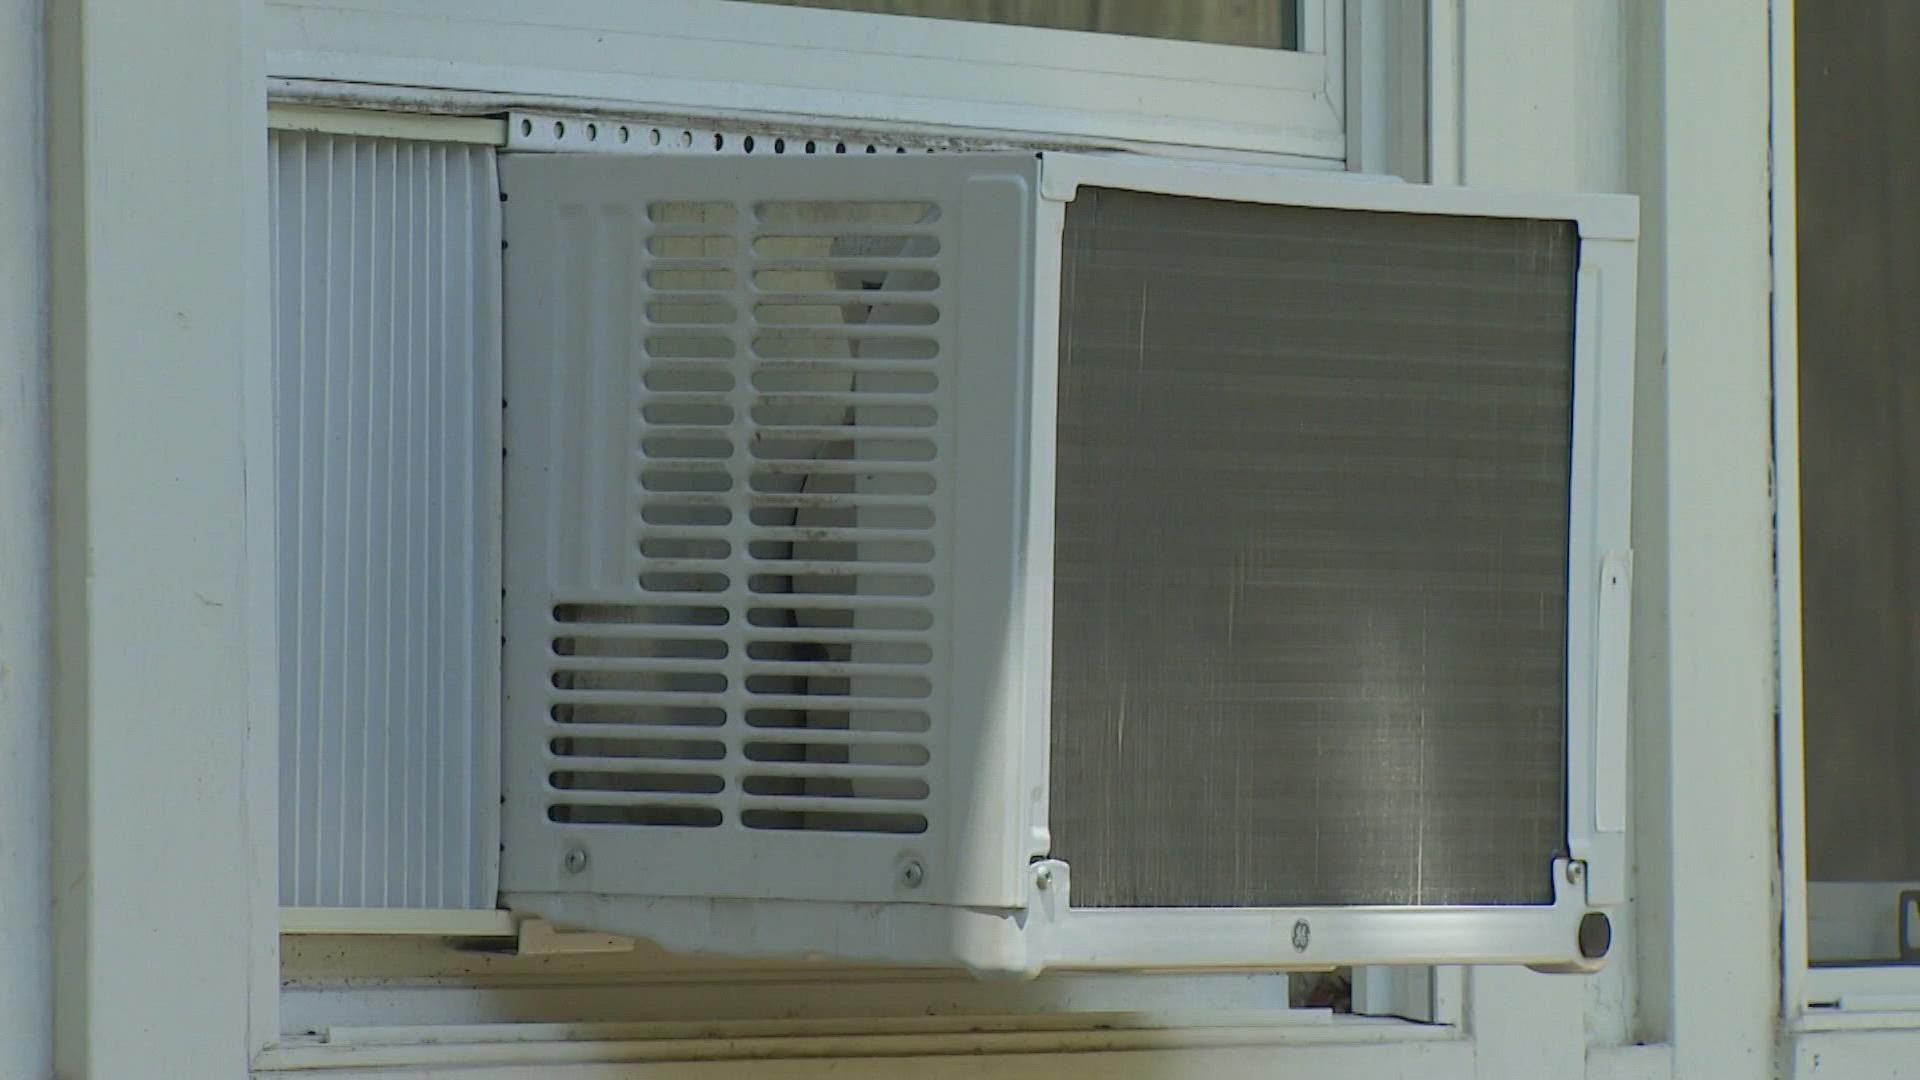 Tarrant County officials said they've seen an uptick in heat-related calls from residents asking for help, including 60 calls from Precinct 1 the past few weeks.